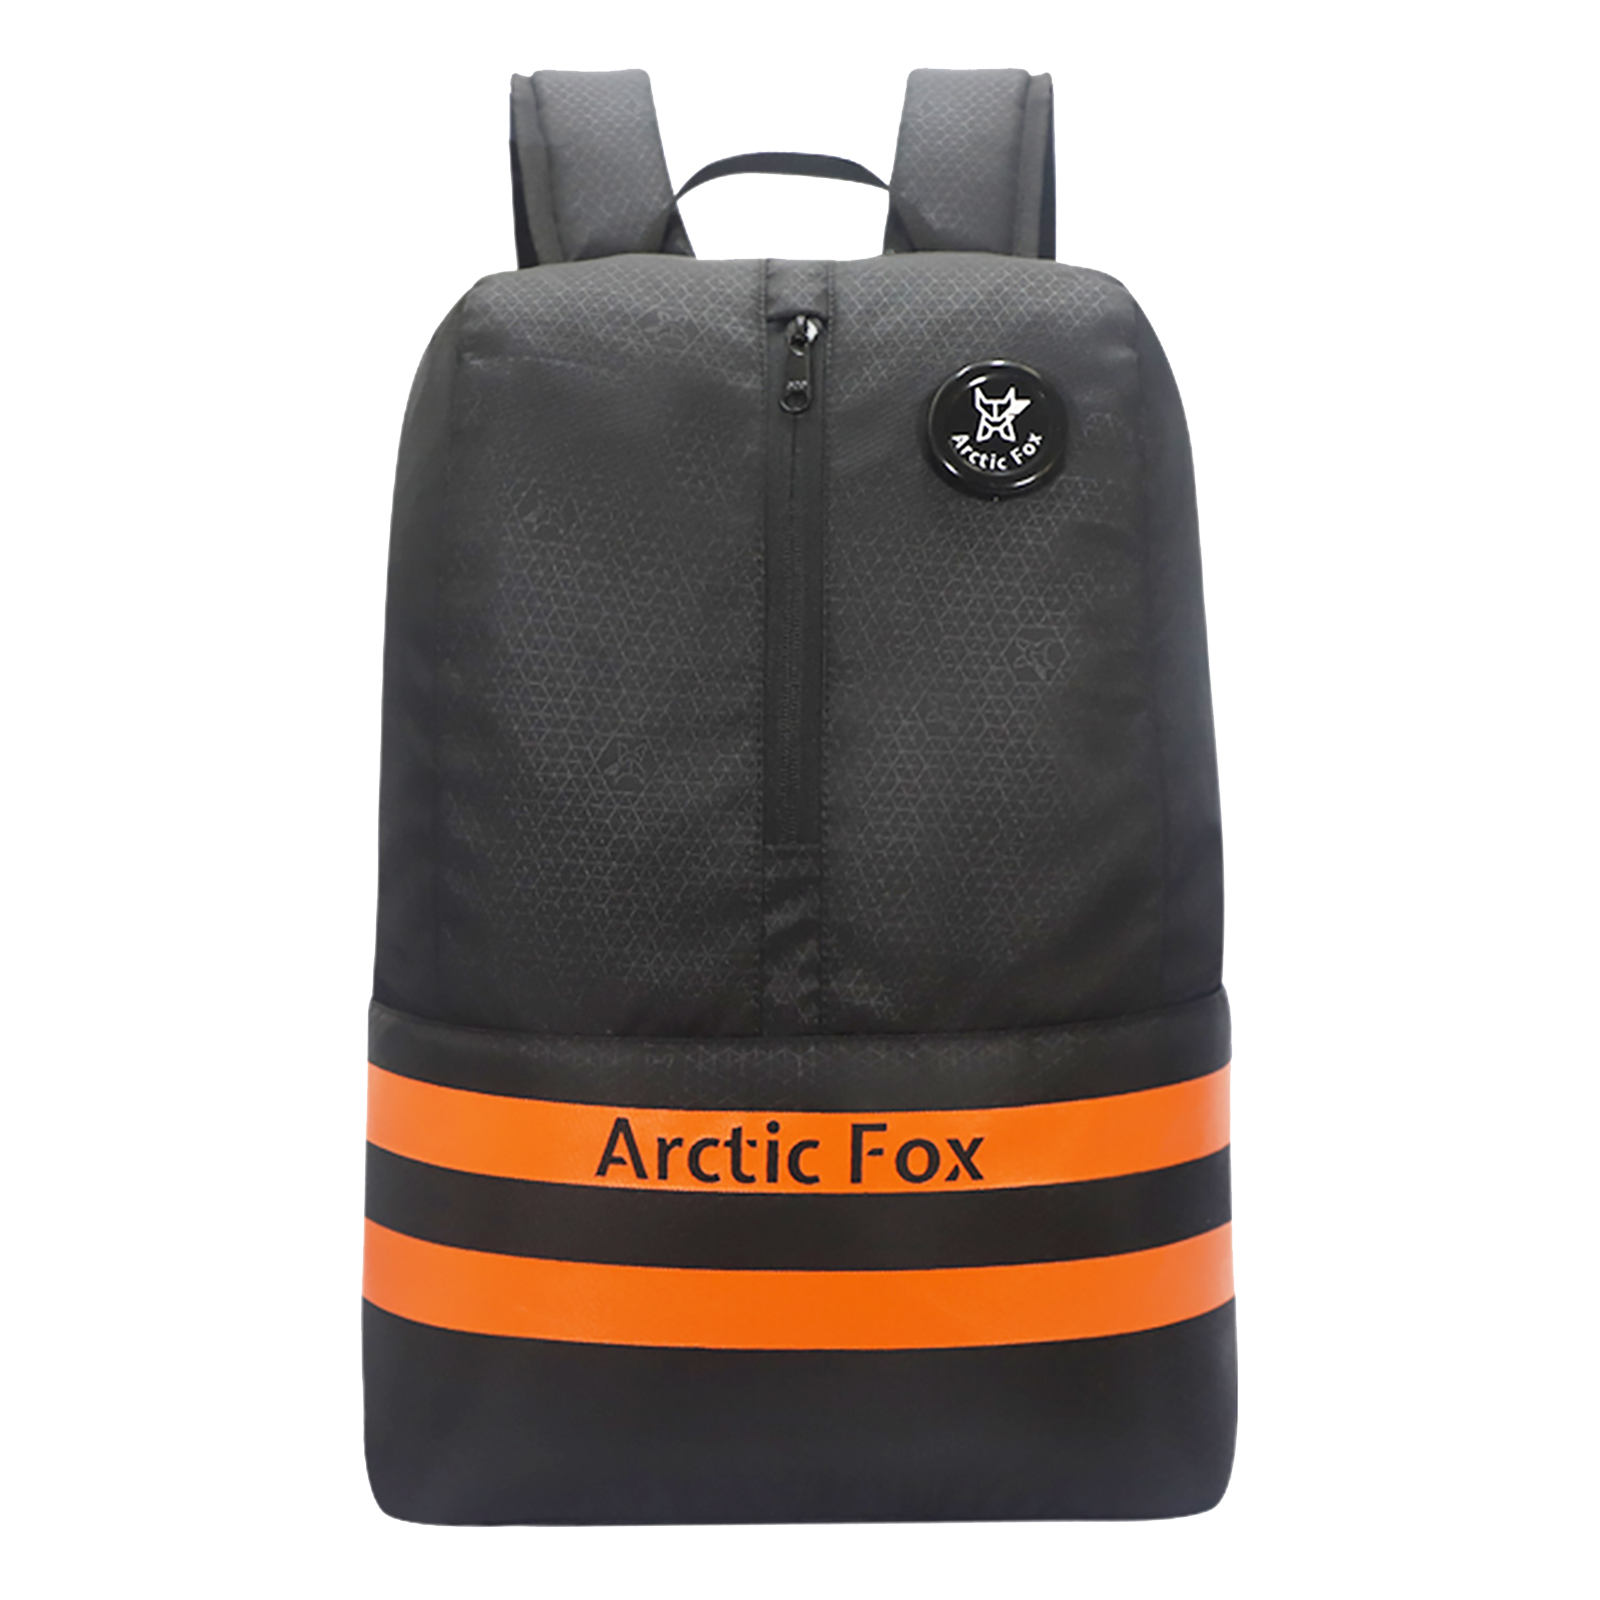 Arctic Fox Tuition 12 Litres PU Coated Polyester Backpack (3 Spacious Compartments, FTEBPKBLKWZ026012, Black)_1